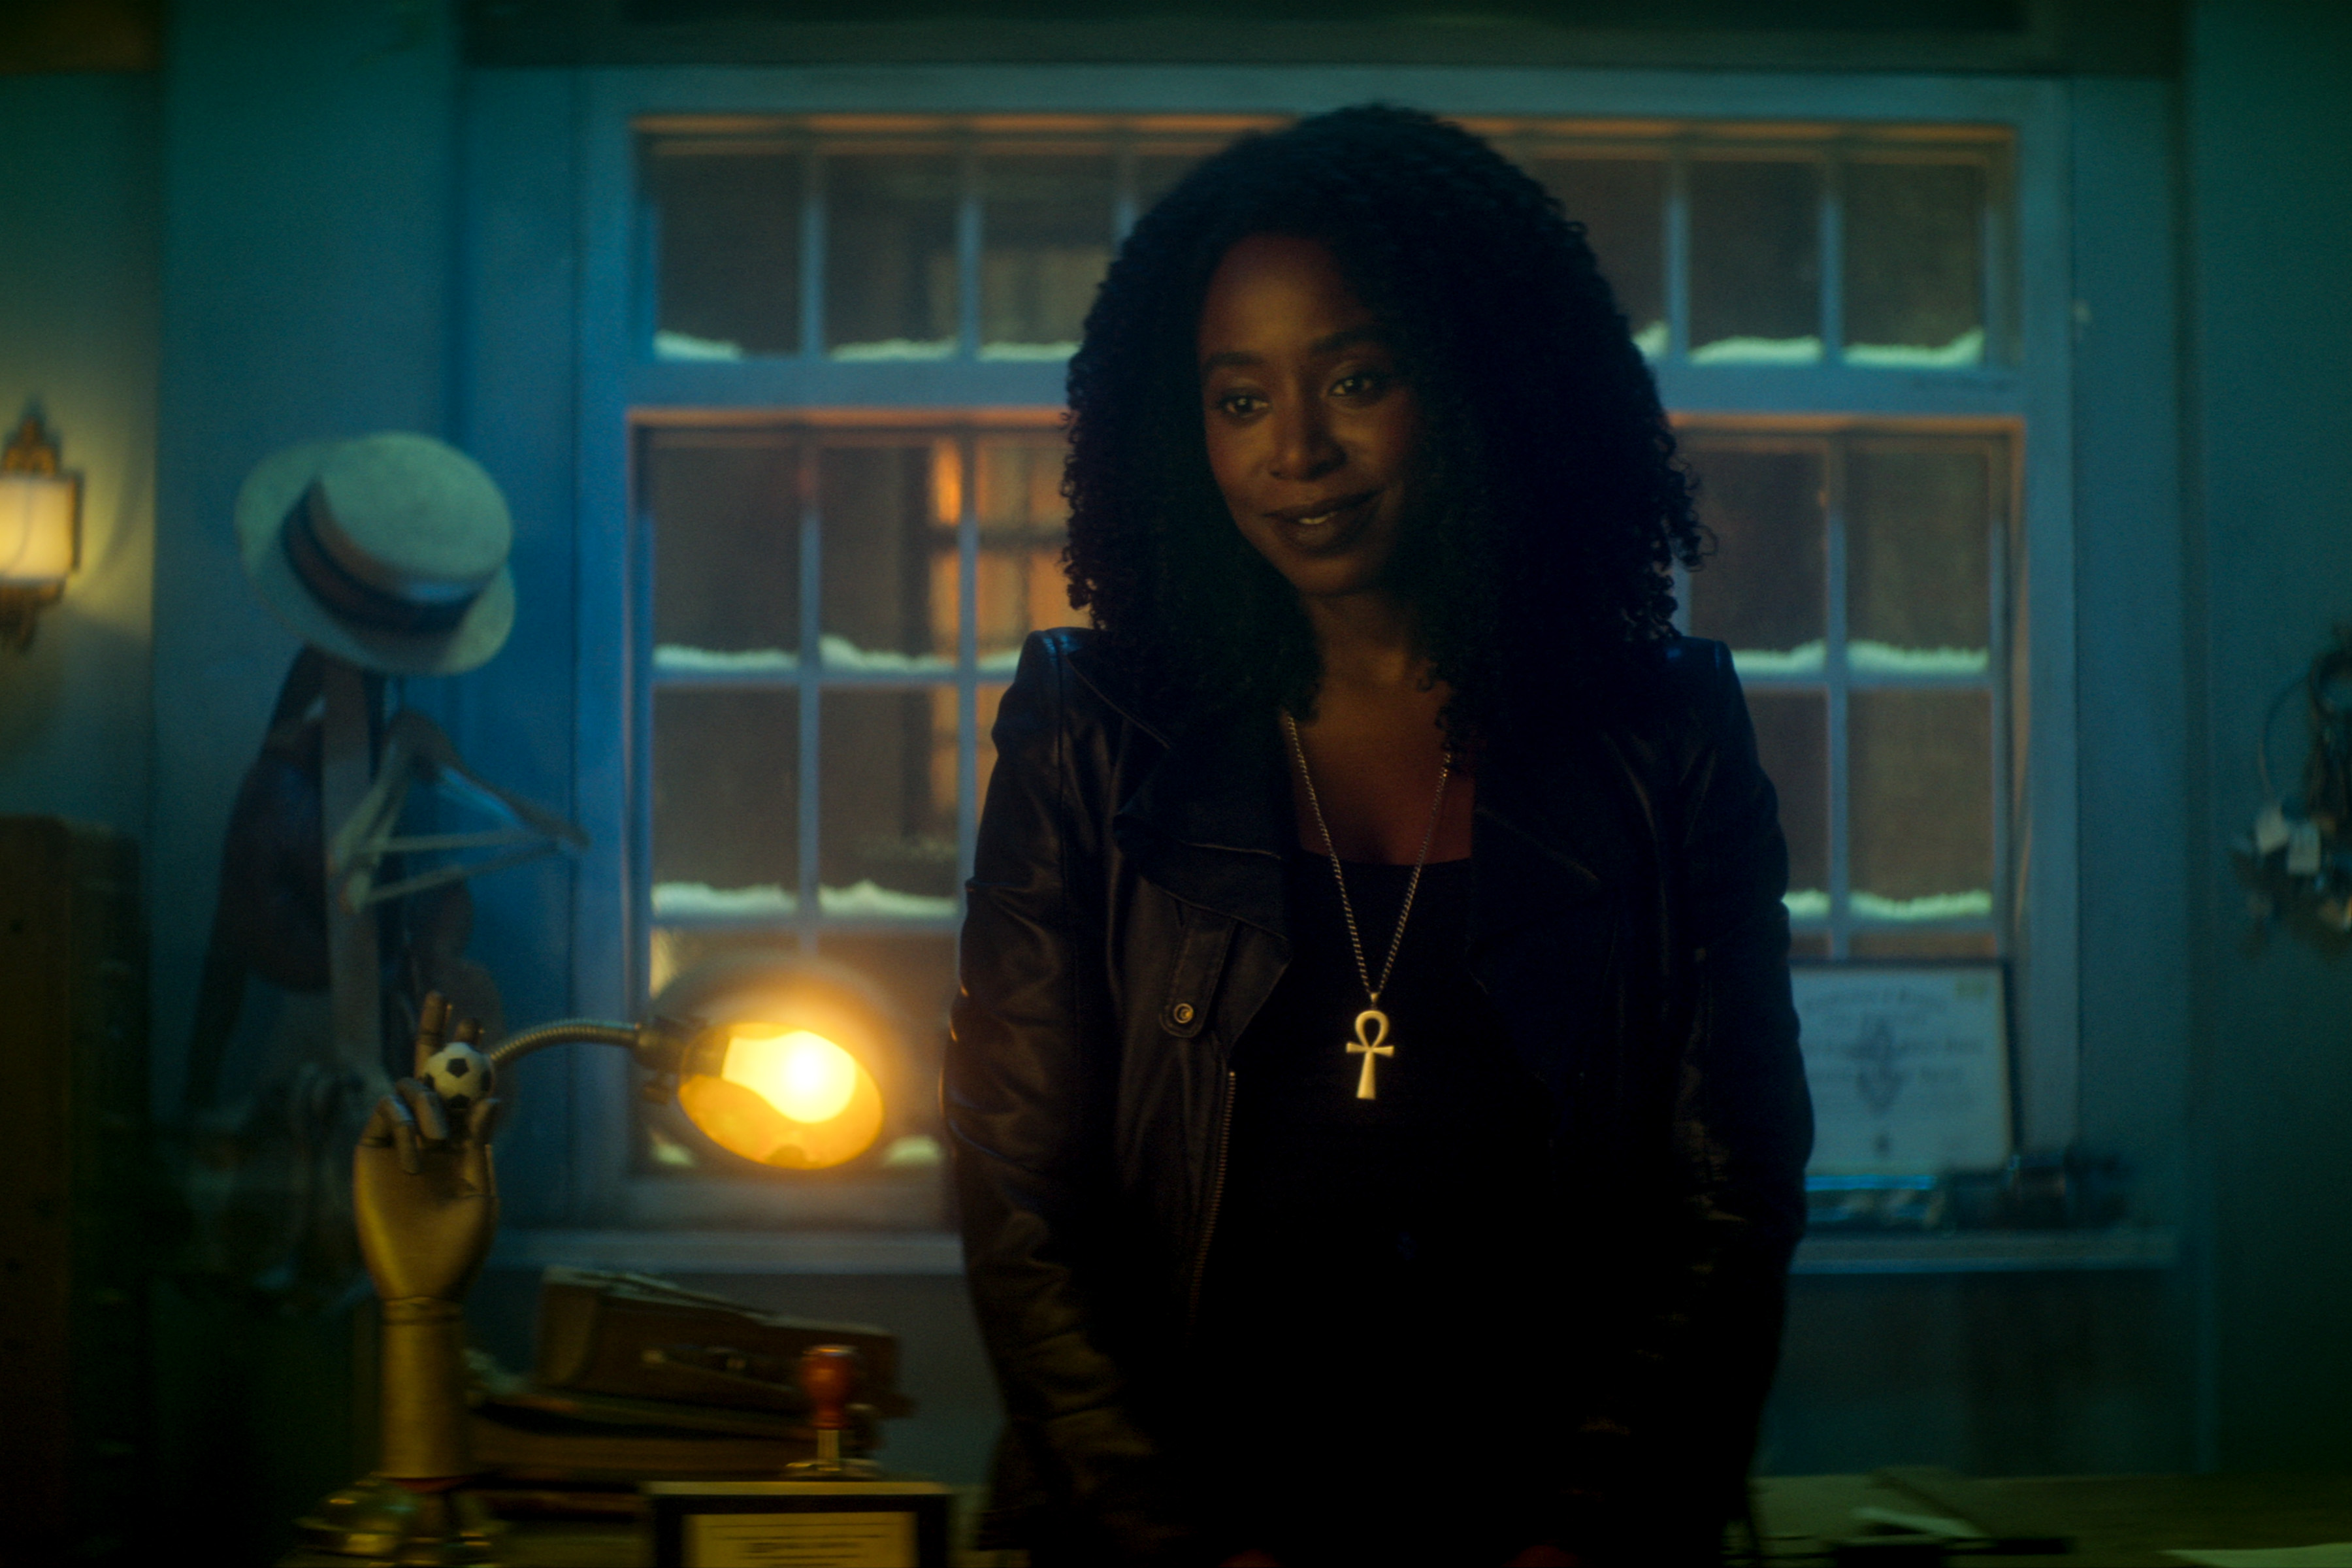 Kirby Howell-Baptiste as Death, standing in an office in front of a window, in episode 1 of DEAD BOY DETECTIVES